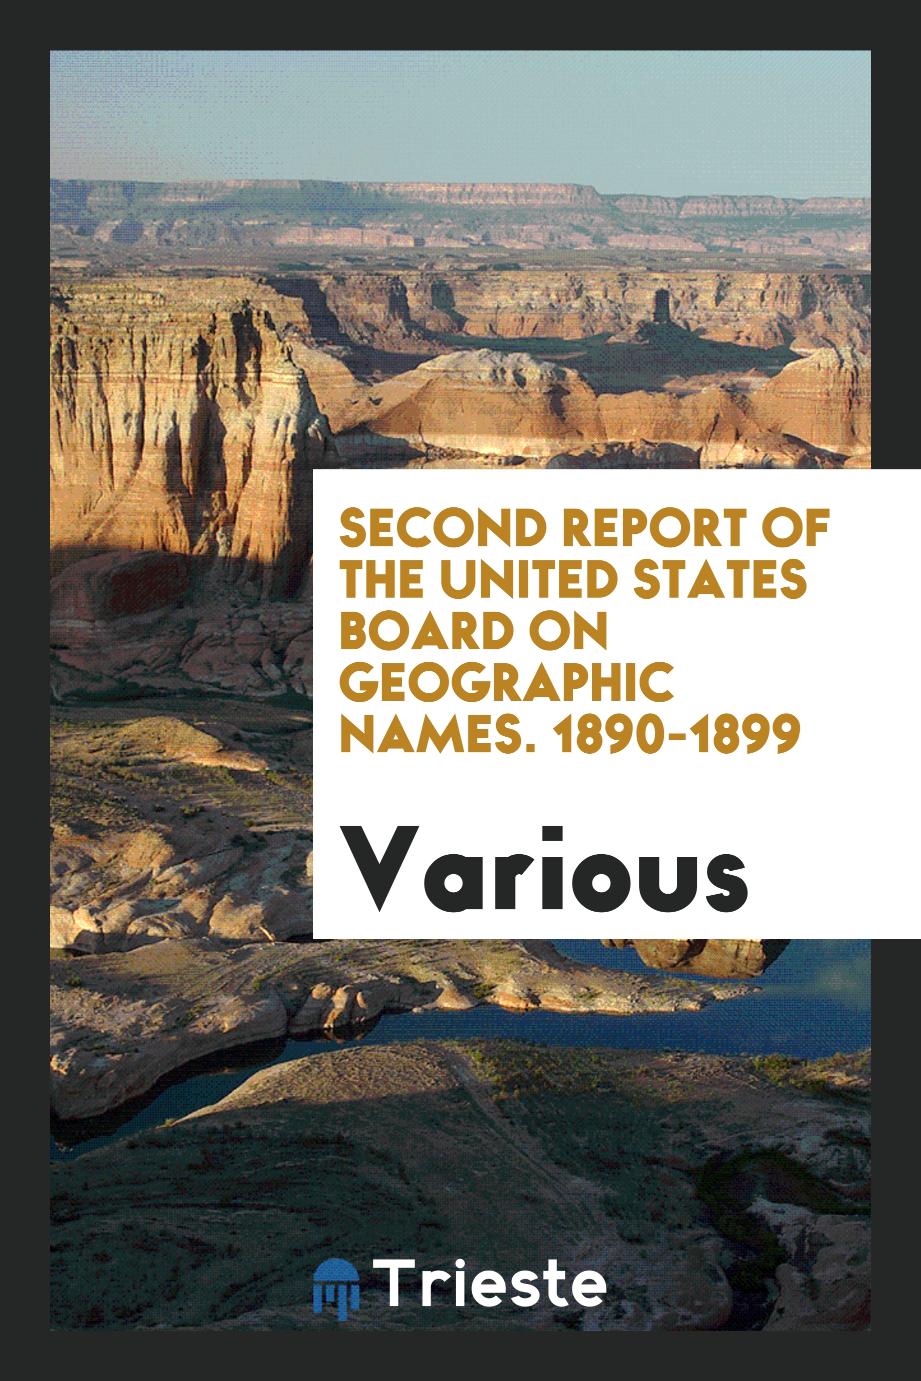 Second Report of the United States Board on Geographic Names. 1890-1899